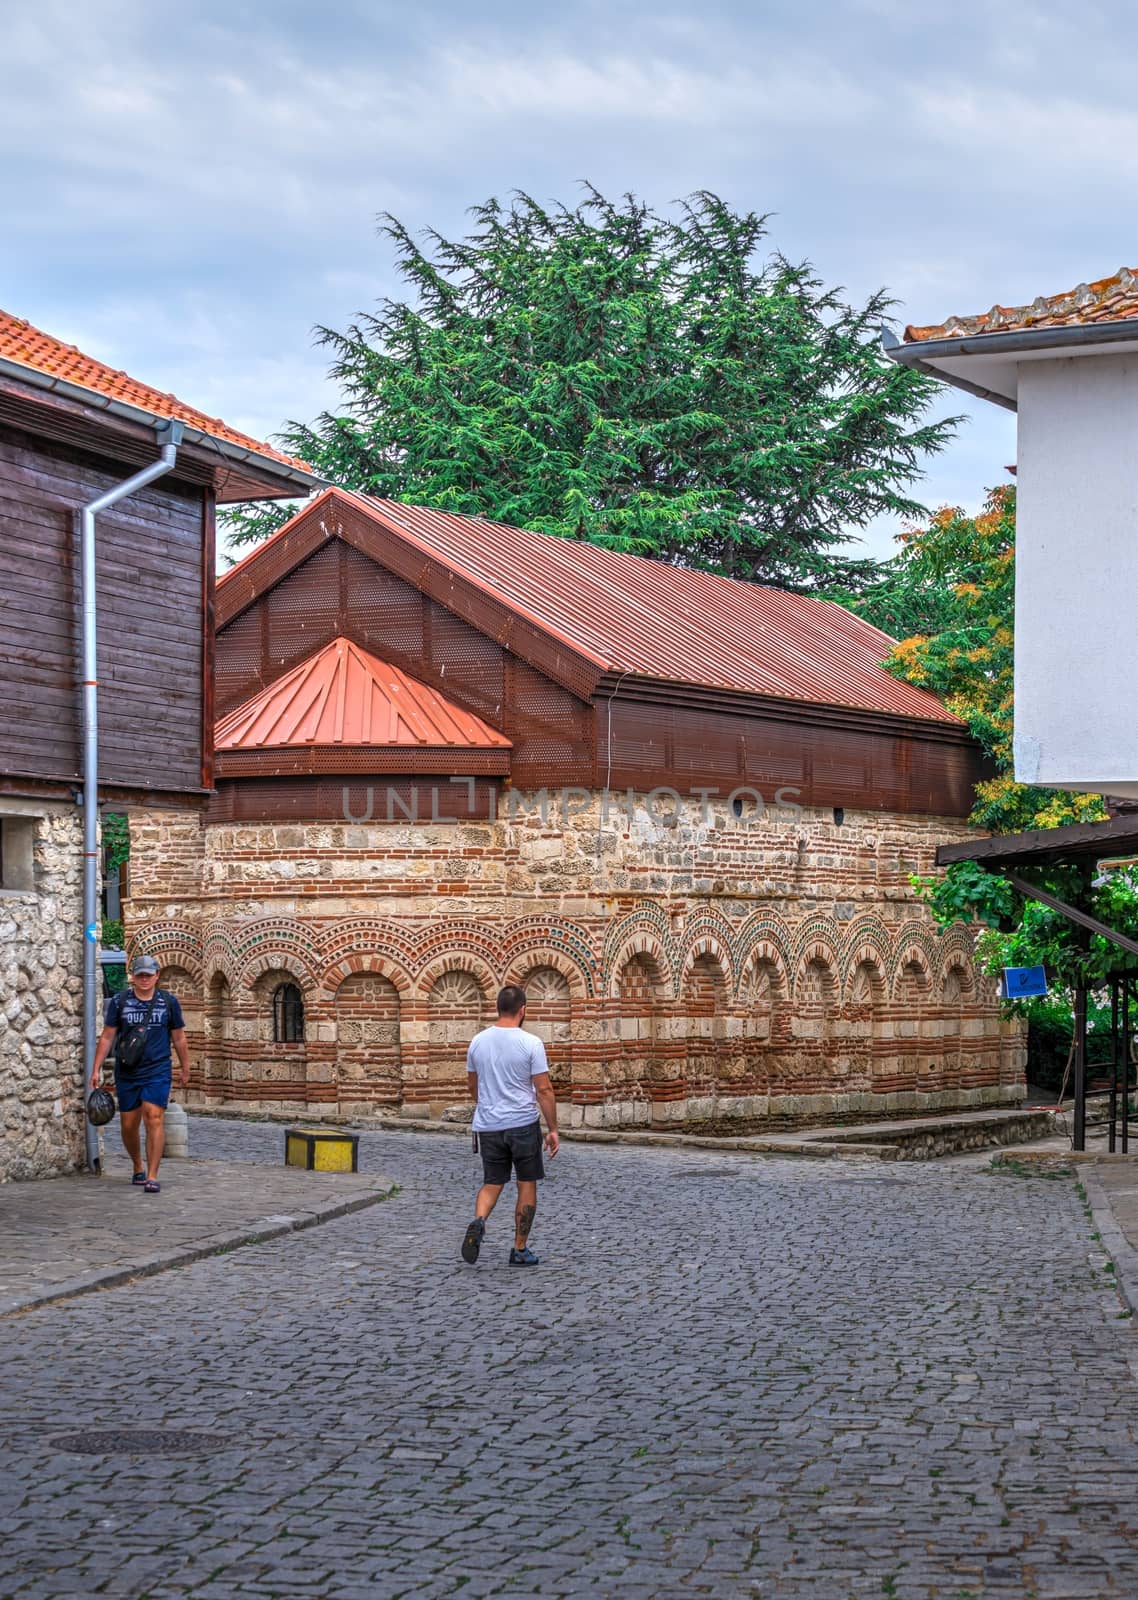 Streets of the old town of Nessebar, Bulgaria by Multipedia